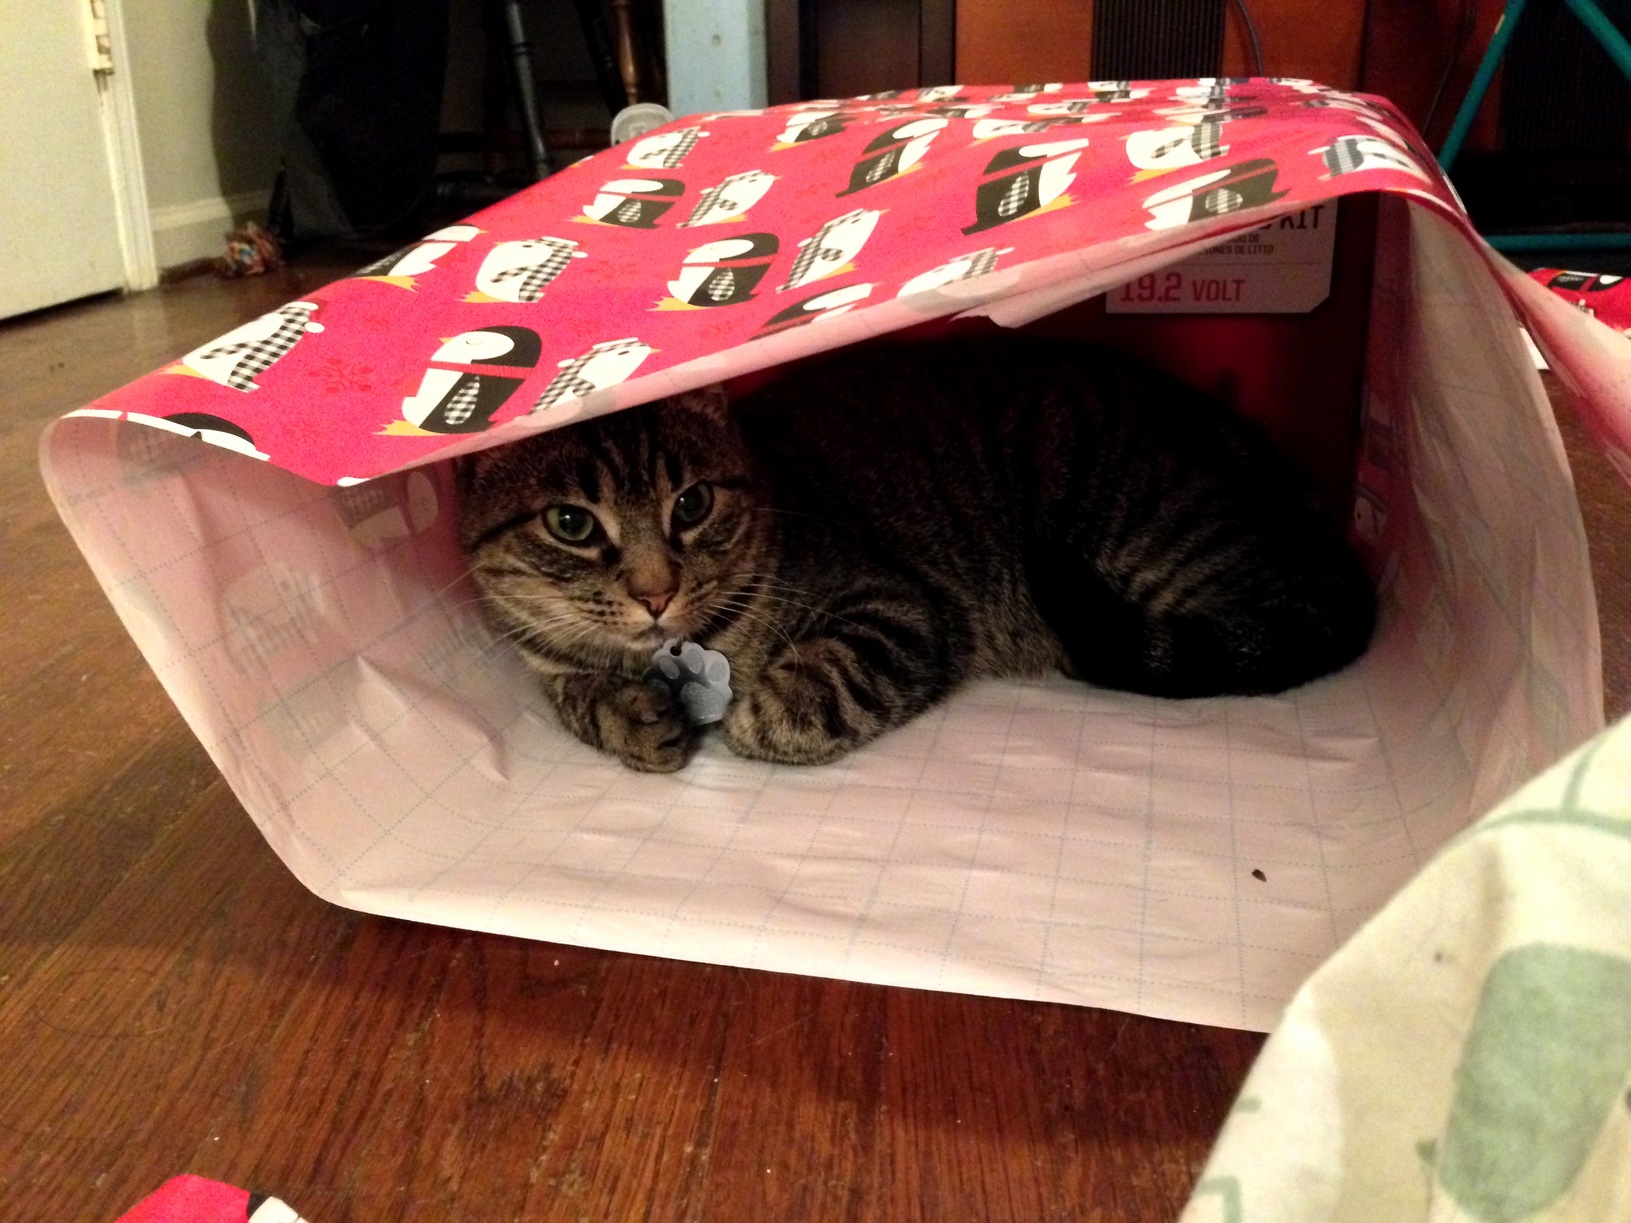 Trying to do some last minute wrapping kitty said nope.